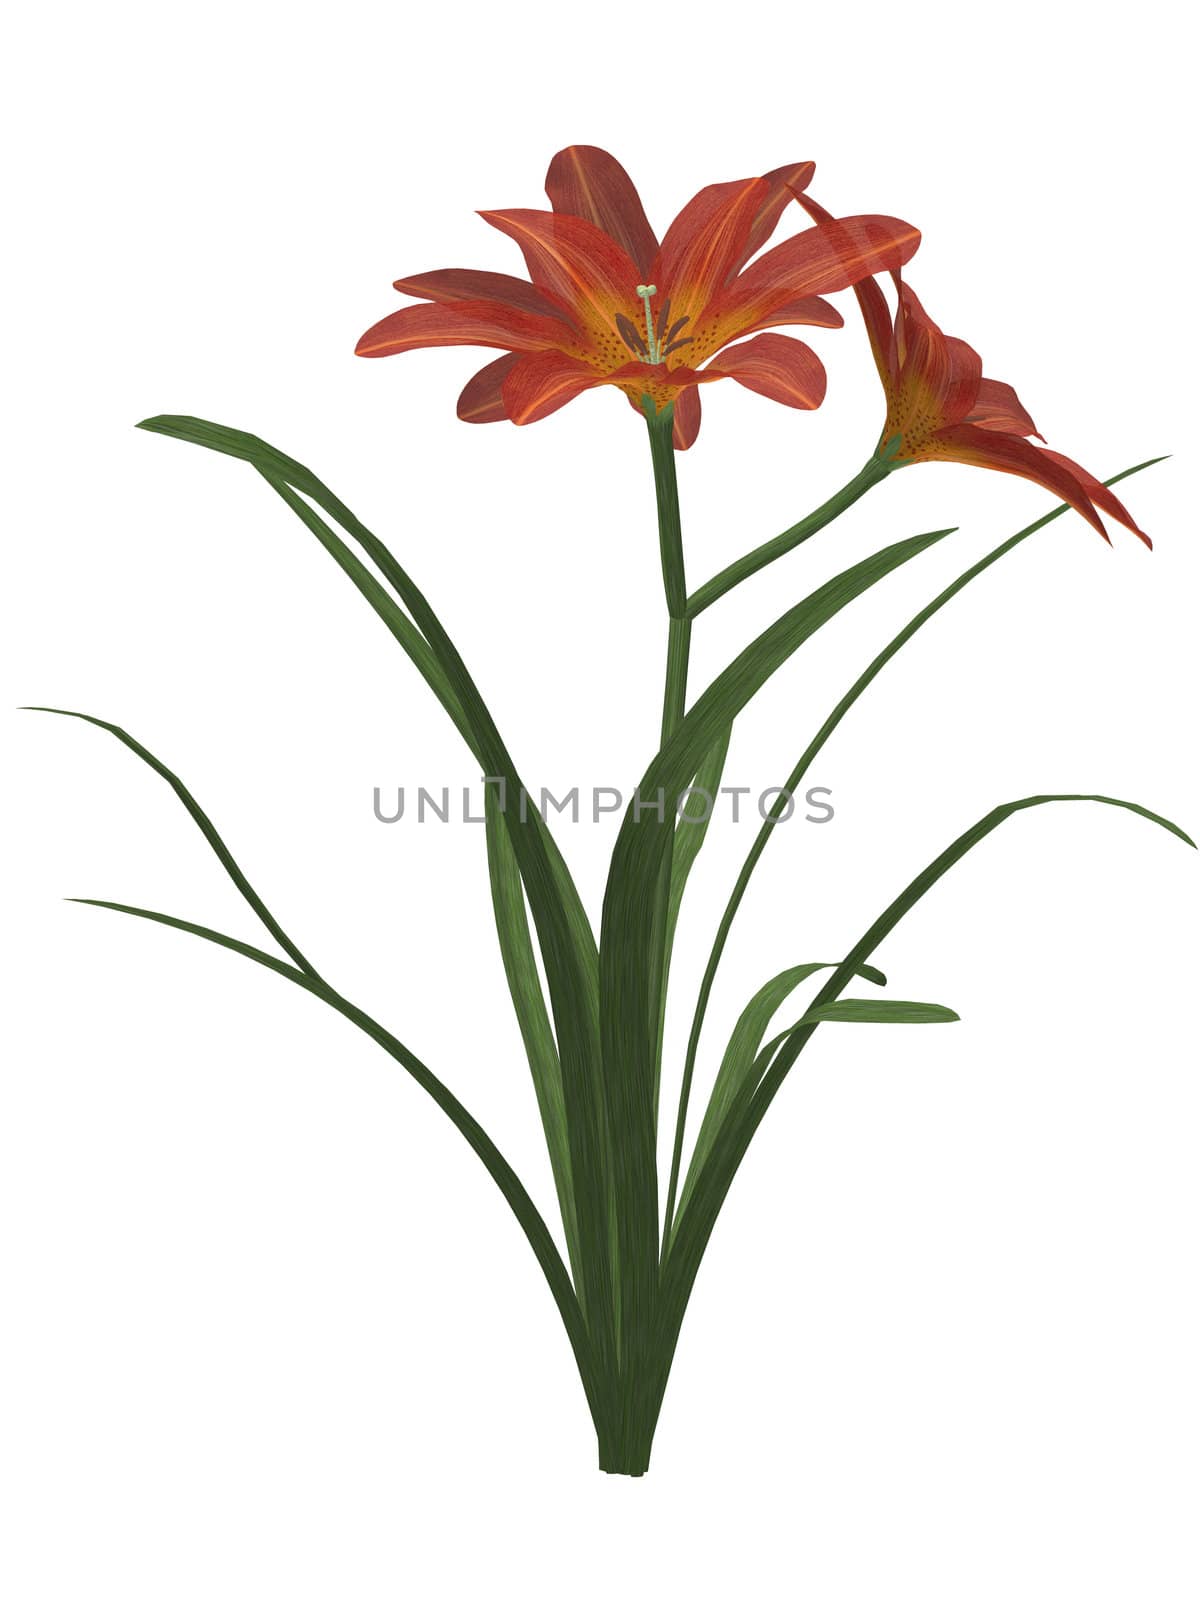 One Orange lily on a white background